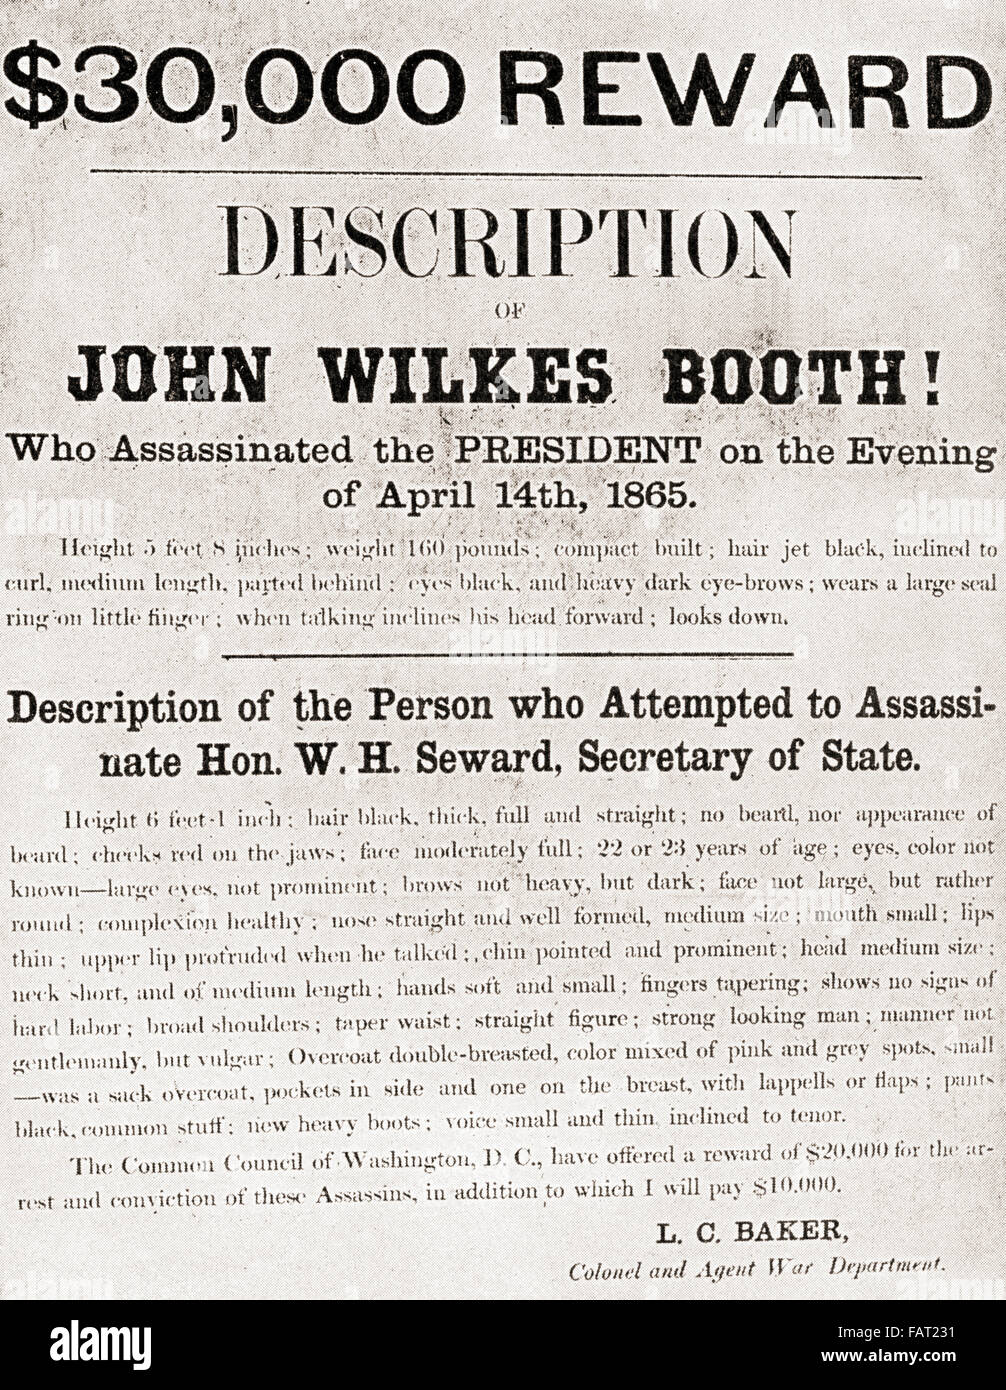 Poster offering a $30,000 reward for the arrest of John Wilkes Booth, the man who assassinated President Abraham Lincoln at Ford's Theatre, in Washington, D.C., on April 14, 1865. Stock Photo